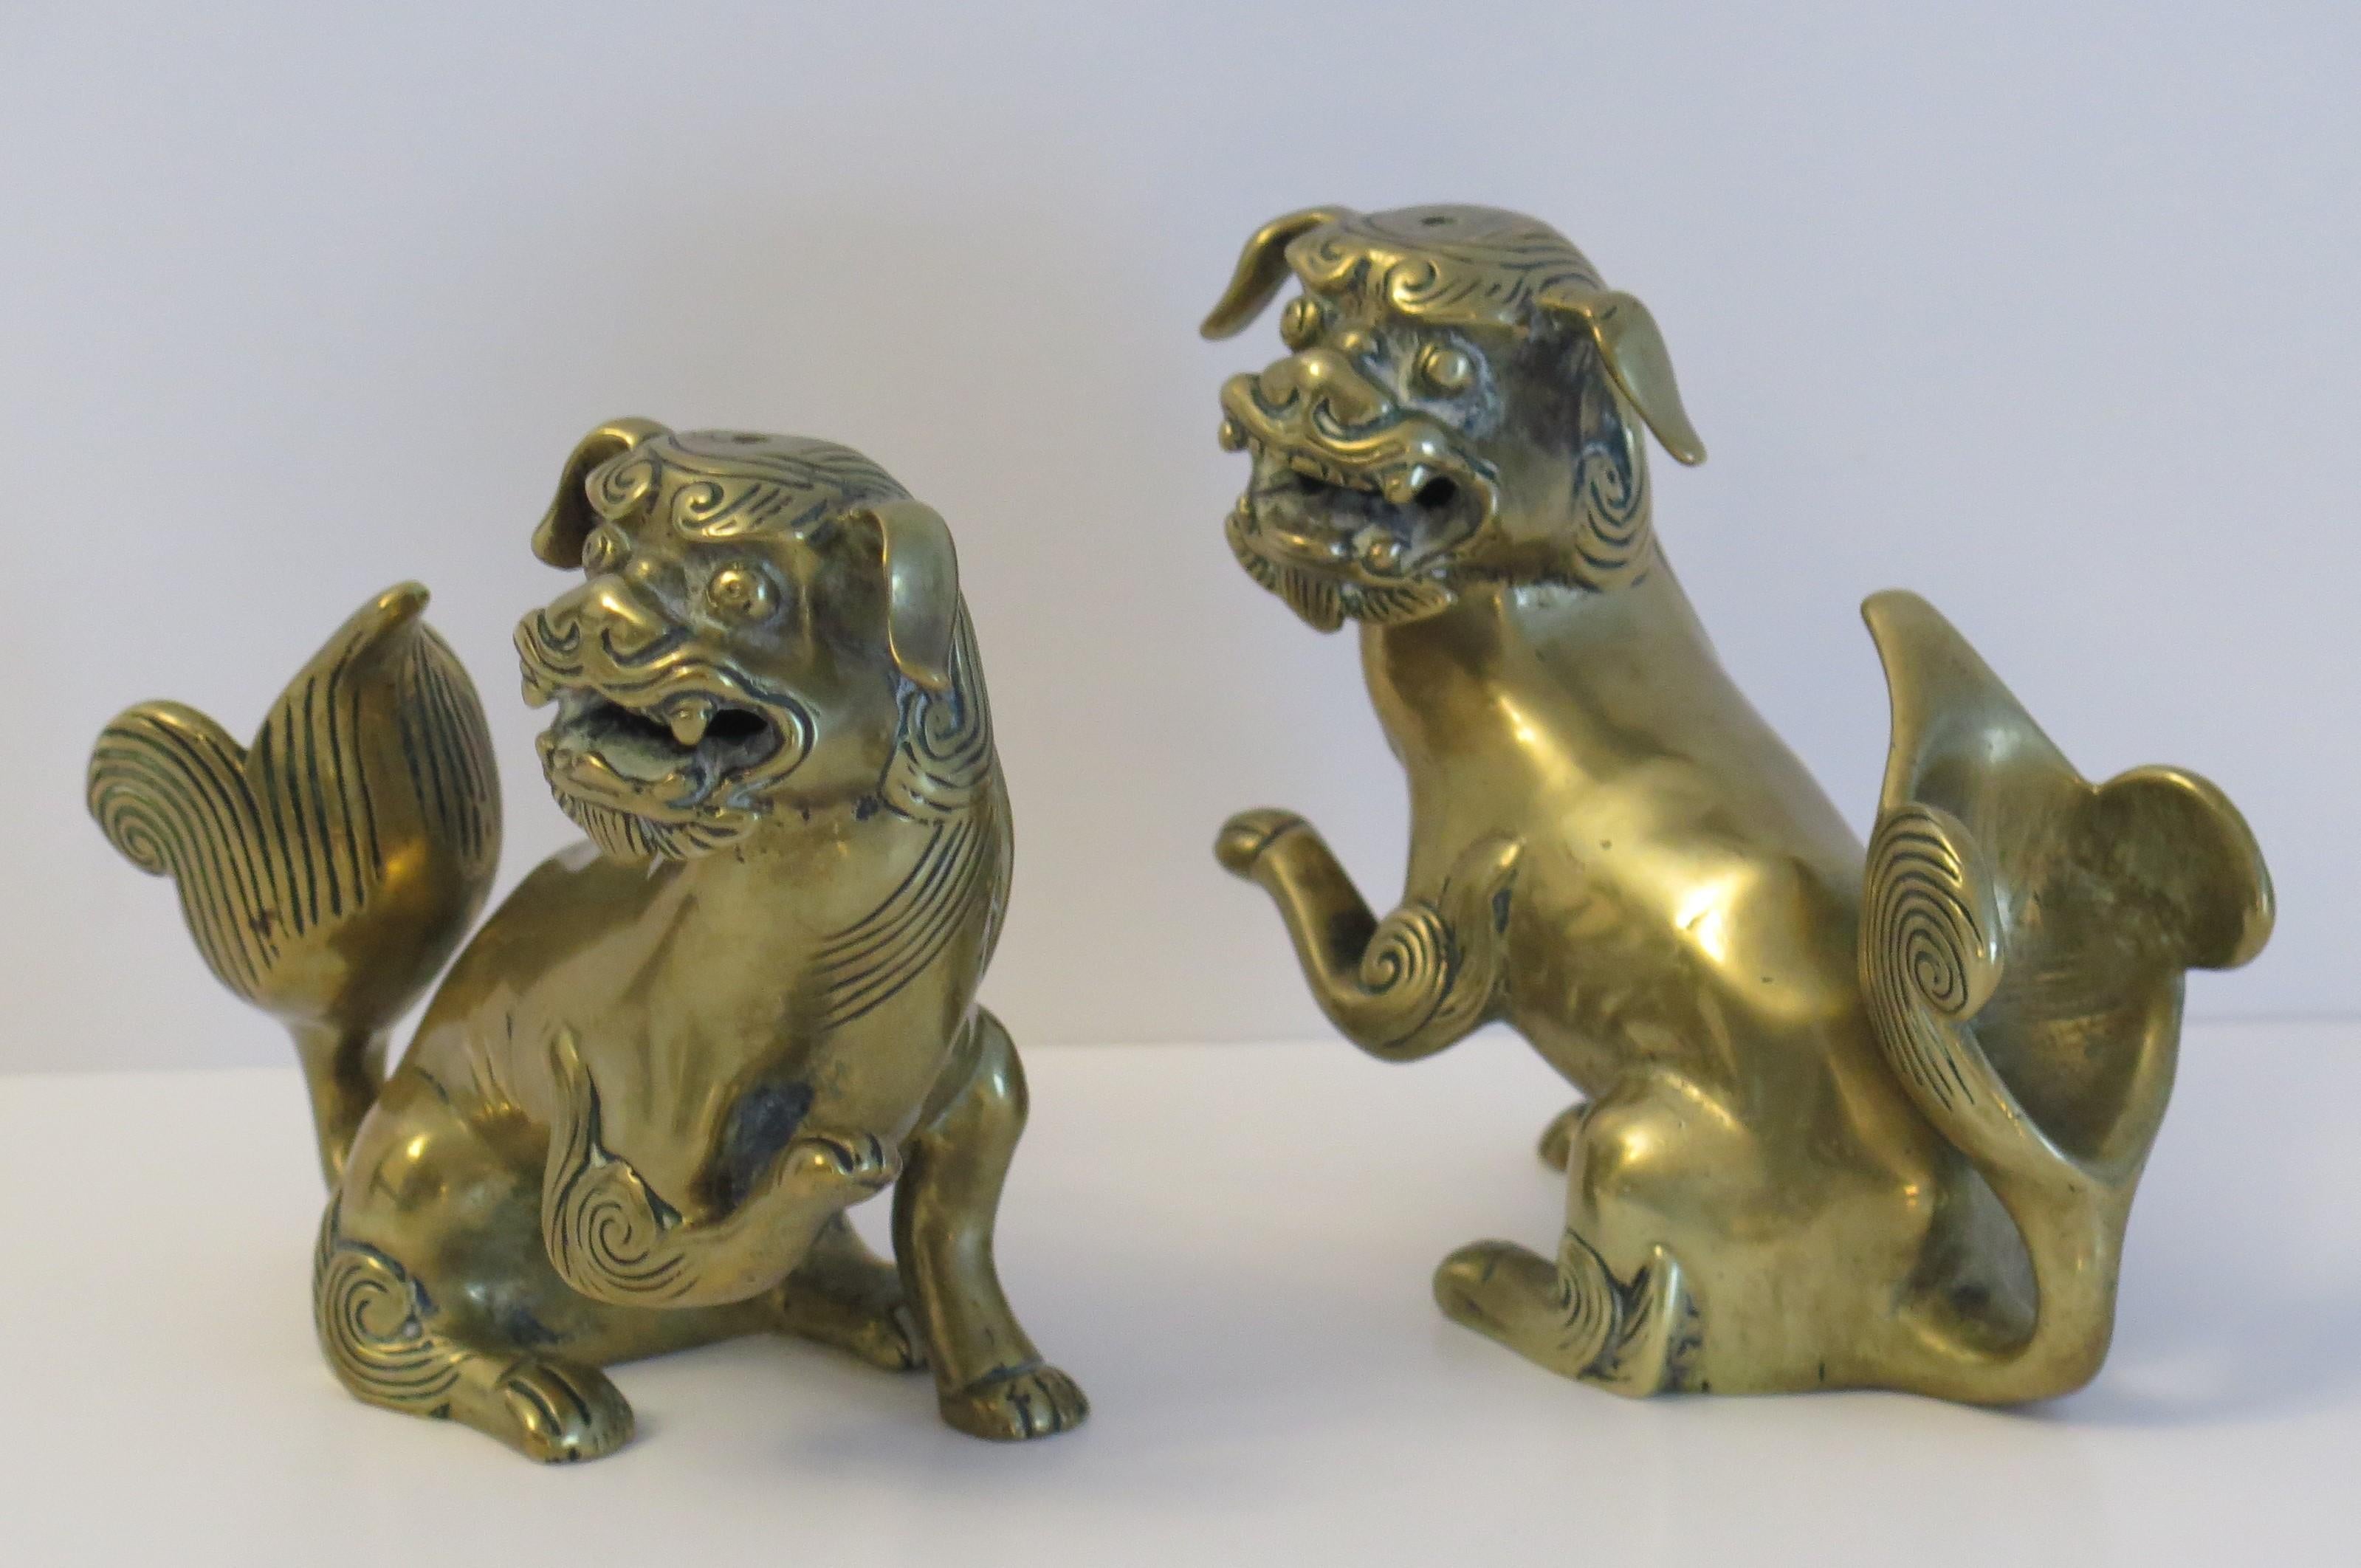 These are a very good pair of antique Chinese foo or lion dog sculptures, sometimes called temple lions, made of a brass-bronze metal alloy, with excellent detail, dating to the early 19th century, Qing period or possibly earlier back to the 18th